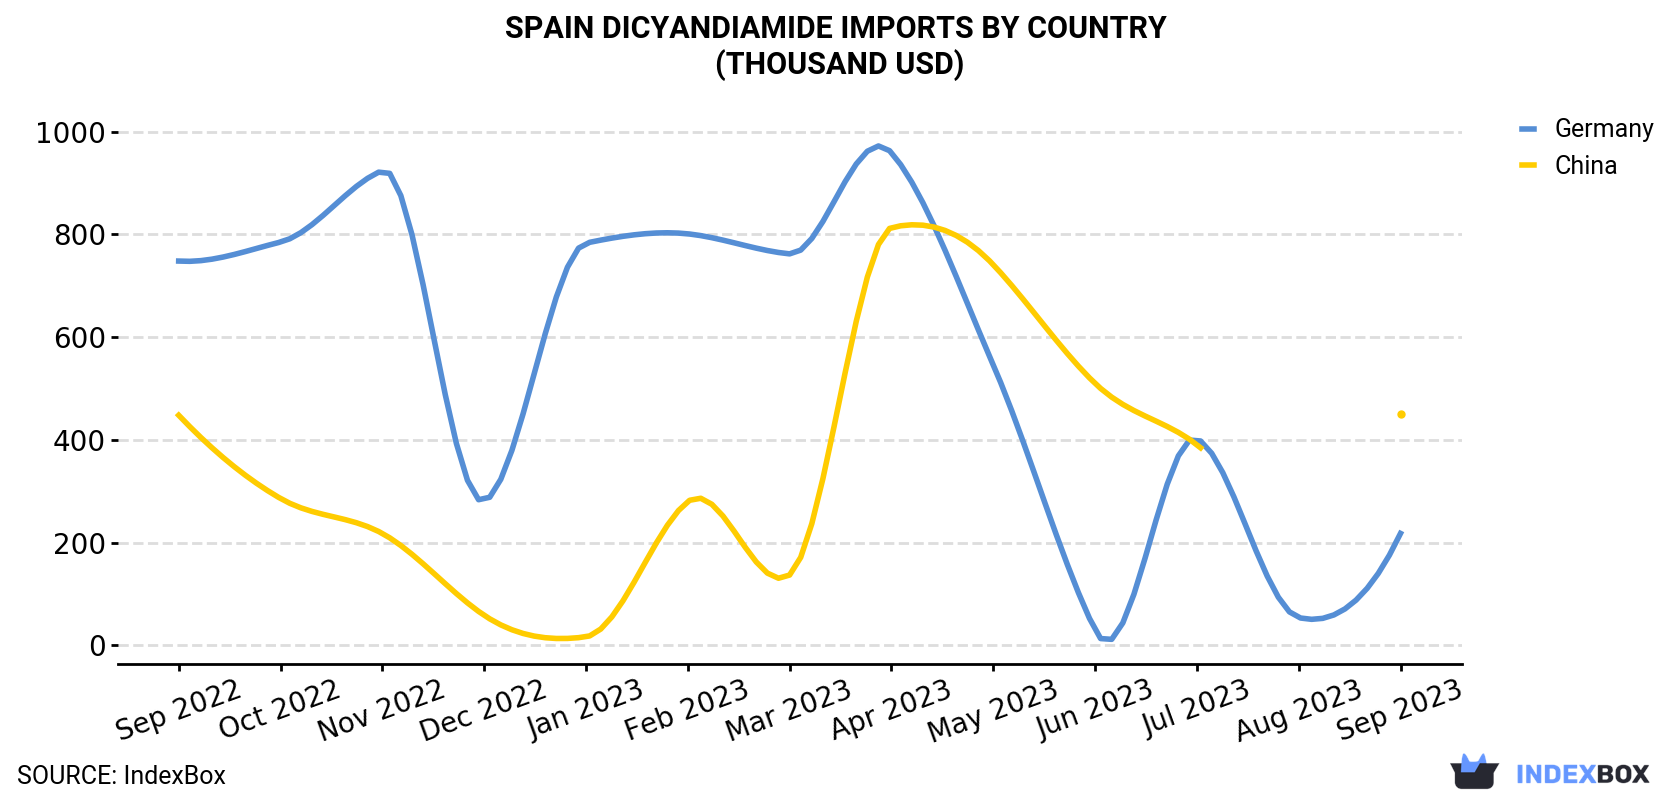 Spain Dicyandiamide Imports By Country (Thousand USD)